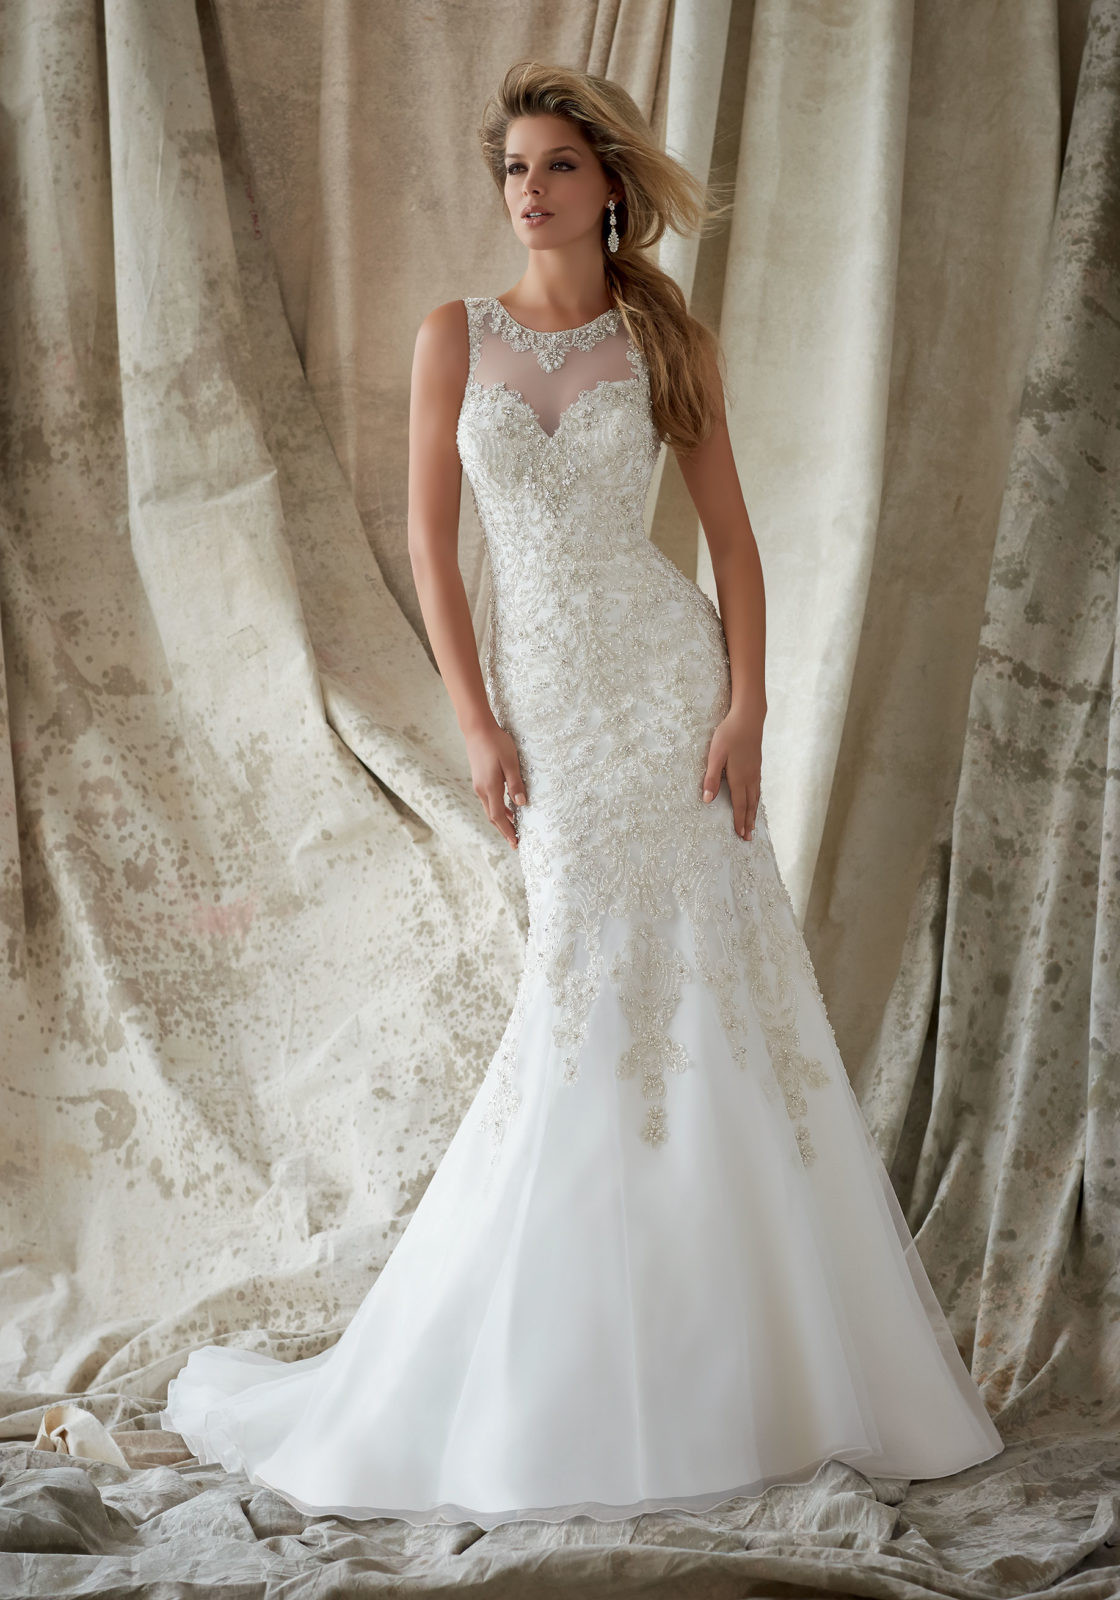 Crystal Wedding Gowns
 Embroidery with Swarovski Crystals Bridal Gown